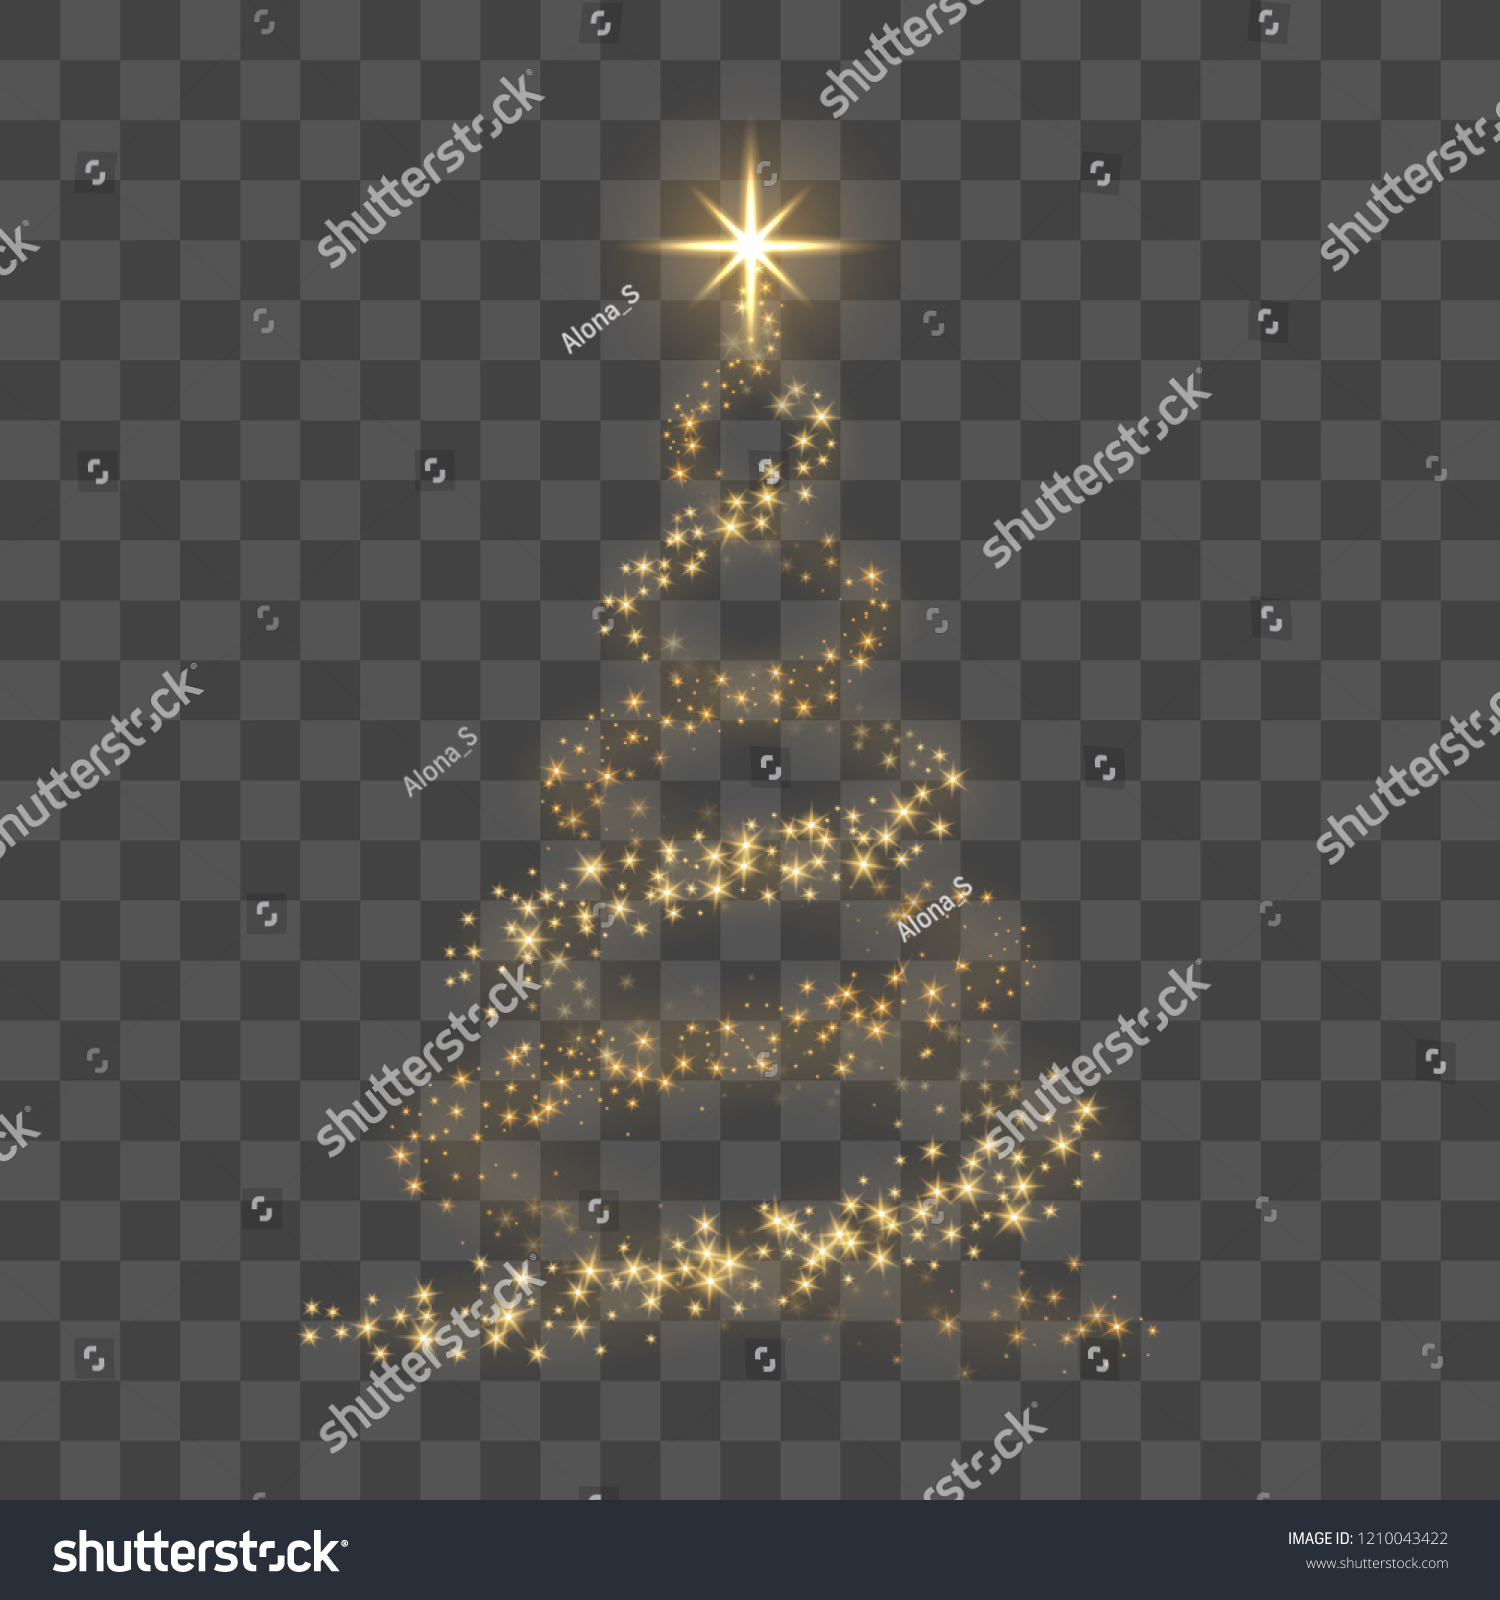 Christmas tree on transparent background. Gold Christmas tree as symbol of Happy New Year, Merry Christmas holiday celebration. Golden light decoration. Bright shiny design Vector illustration #1210043422